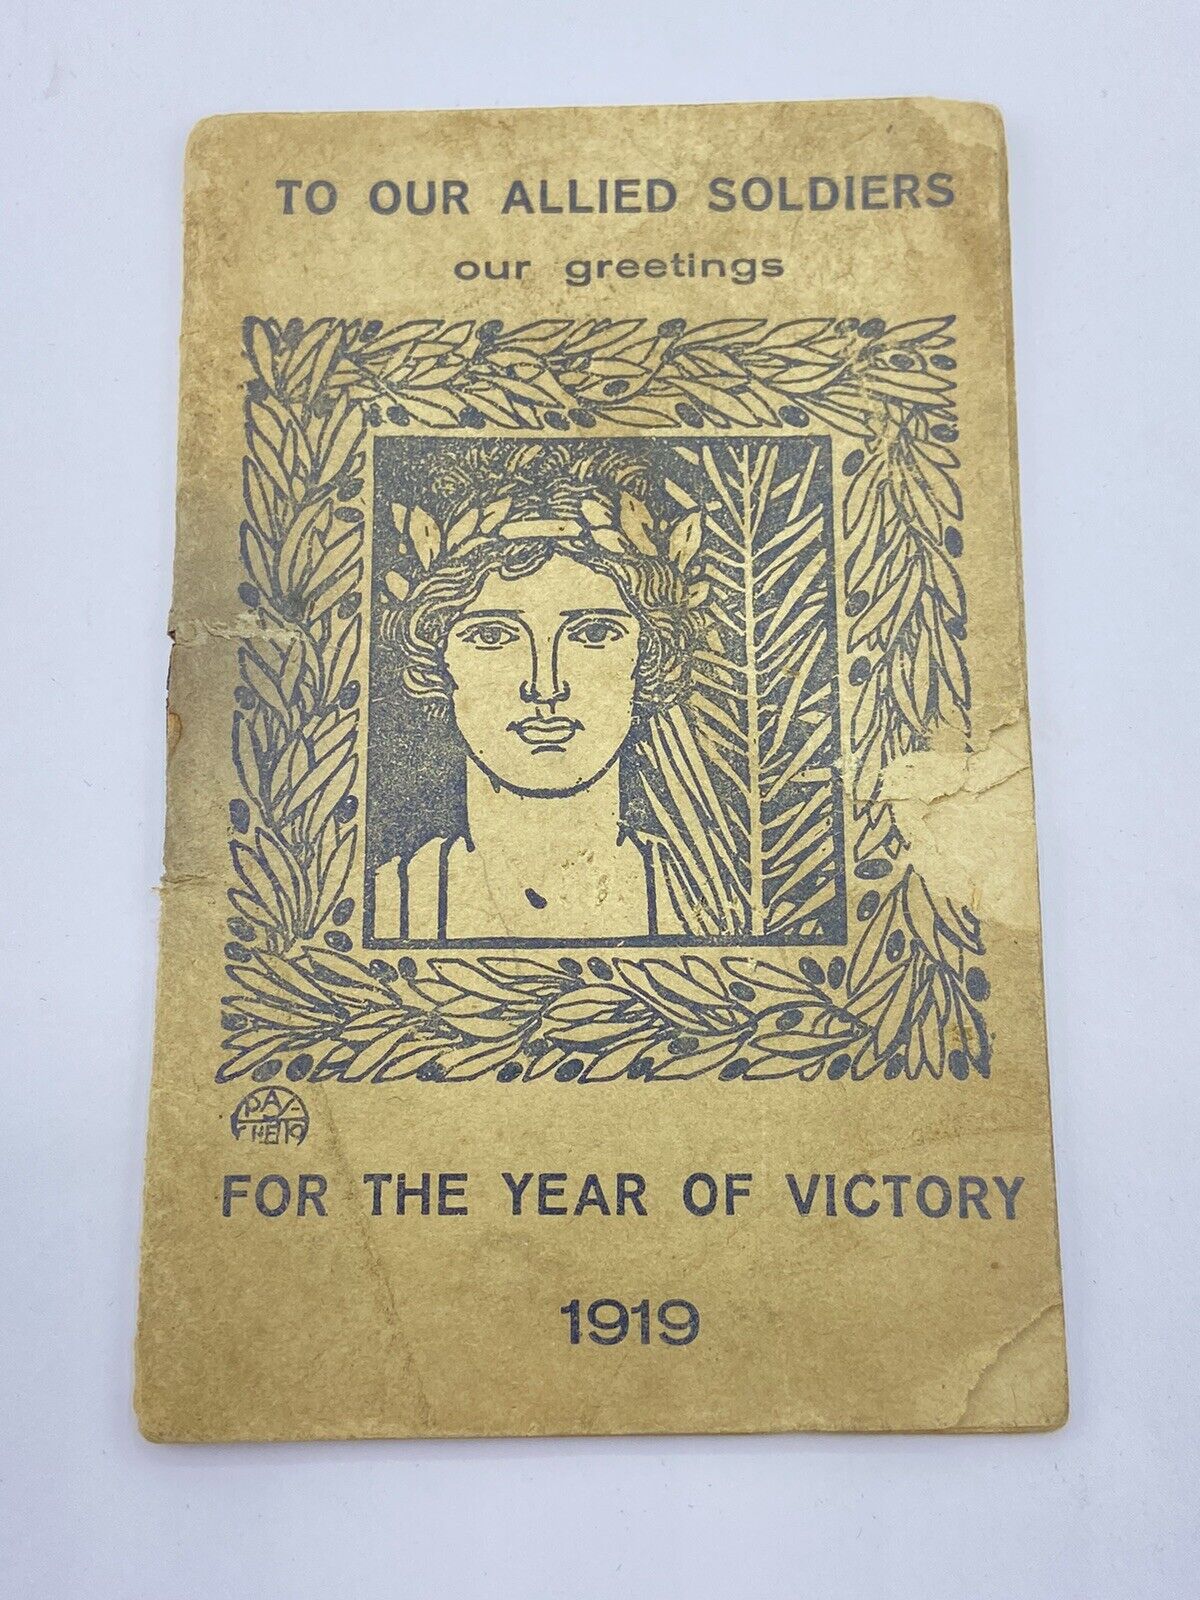 WW1 Italian “To our Allied Soldiers Our Greetings For The Year Of Victory” 1919